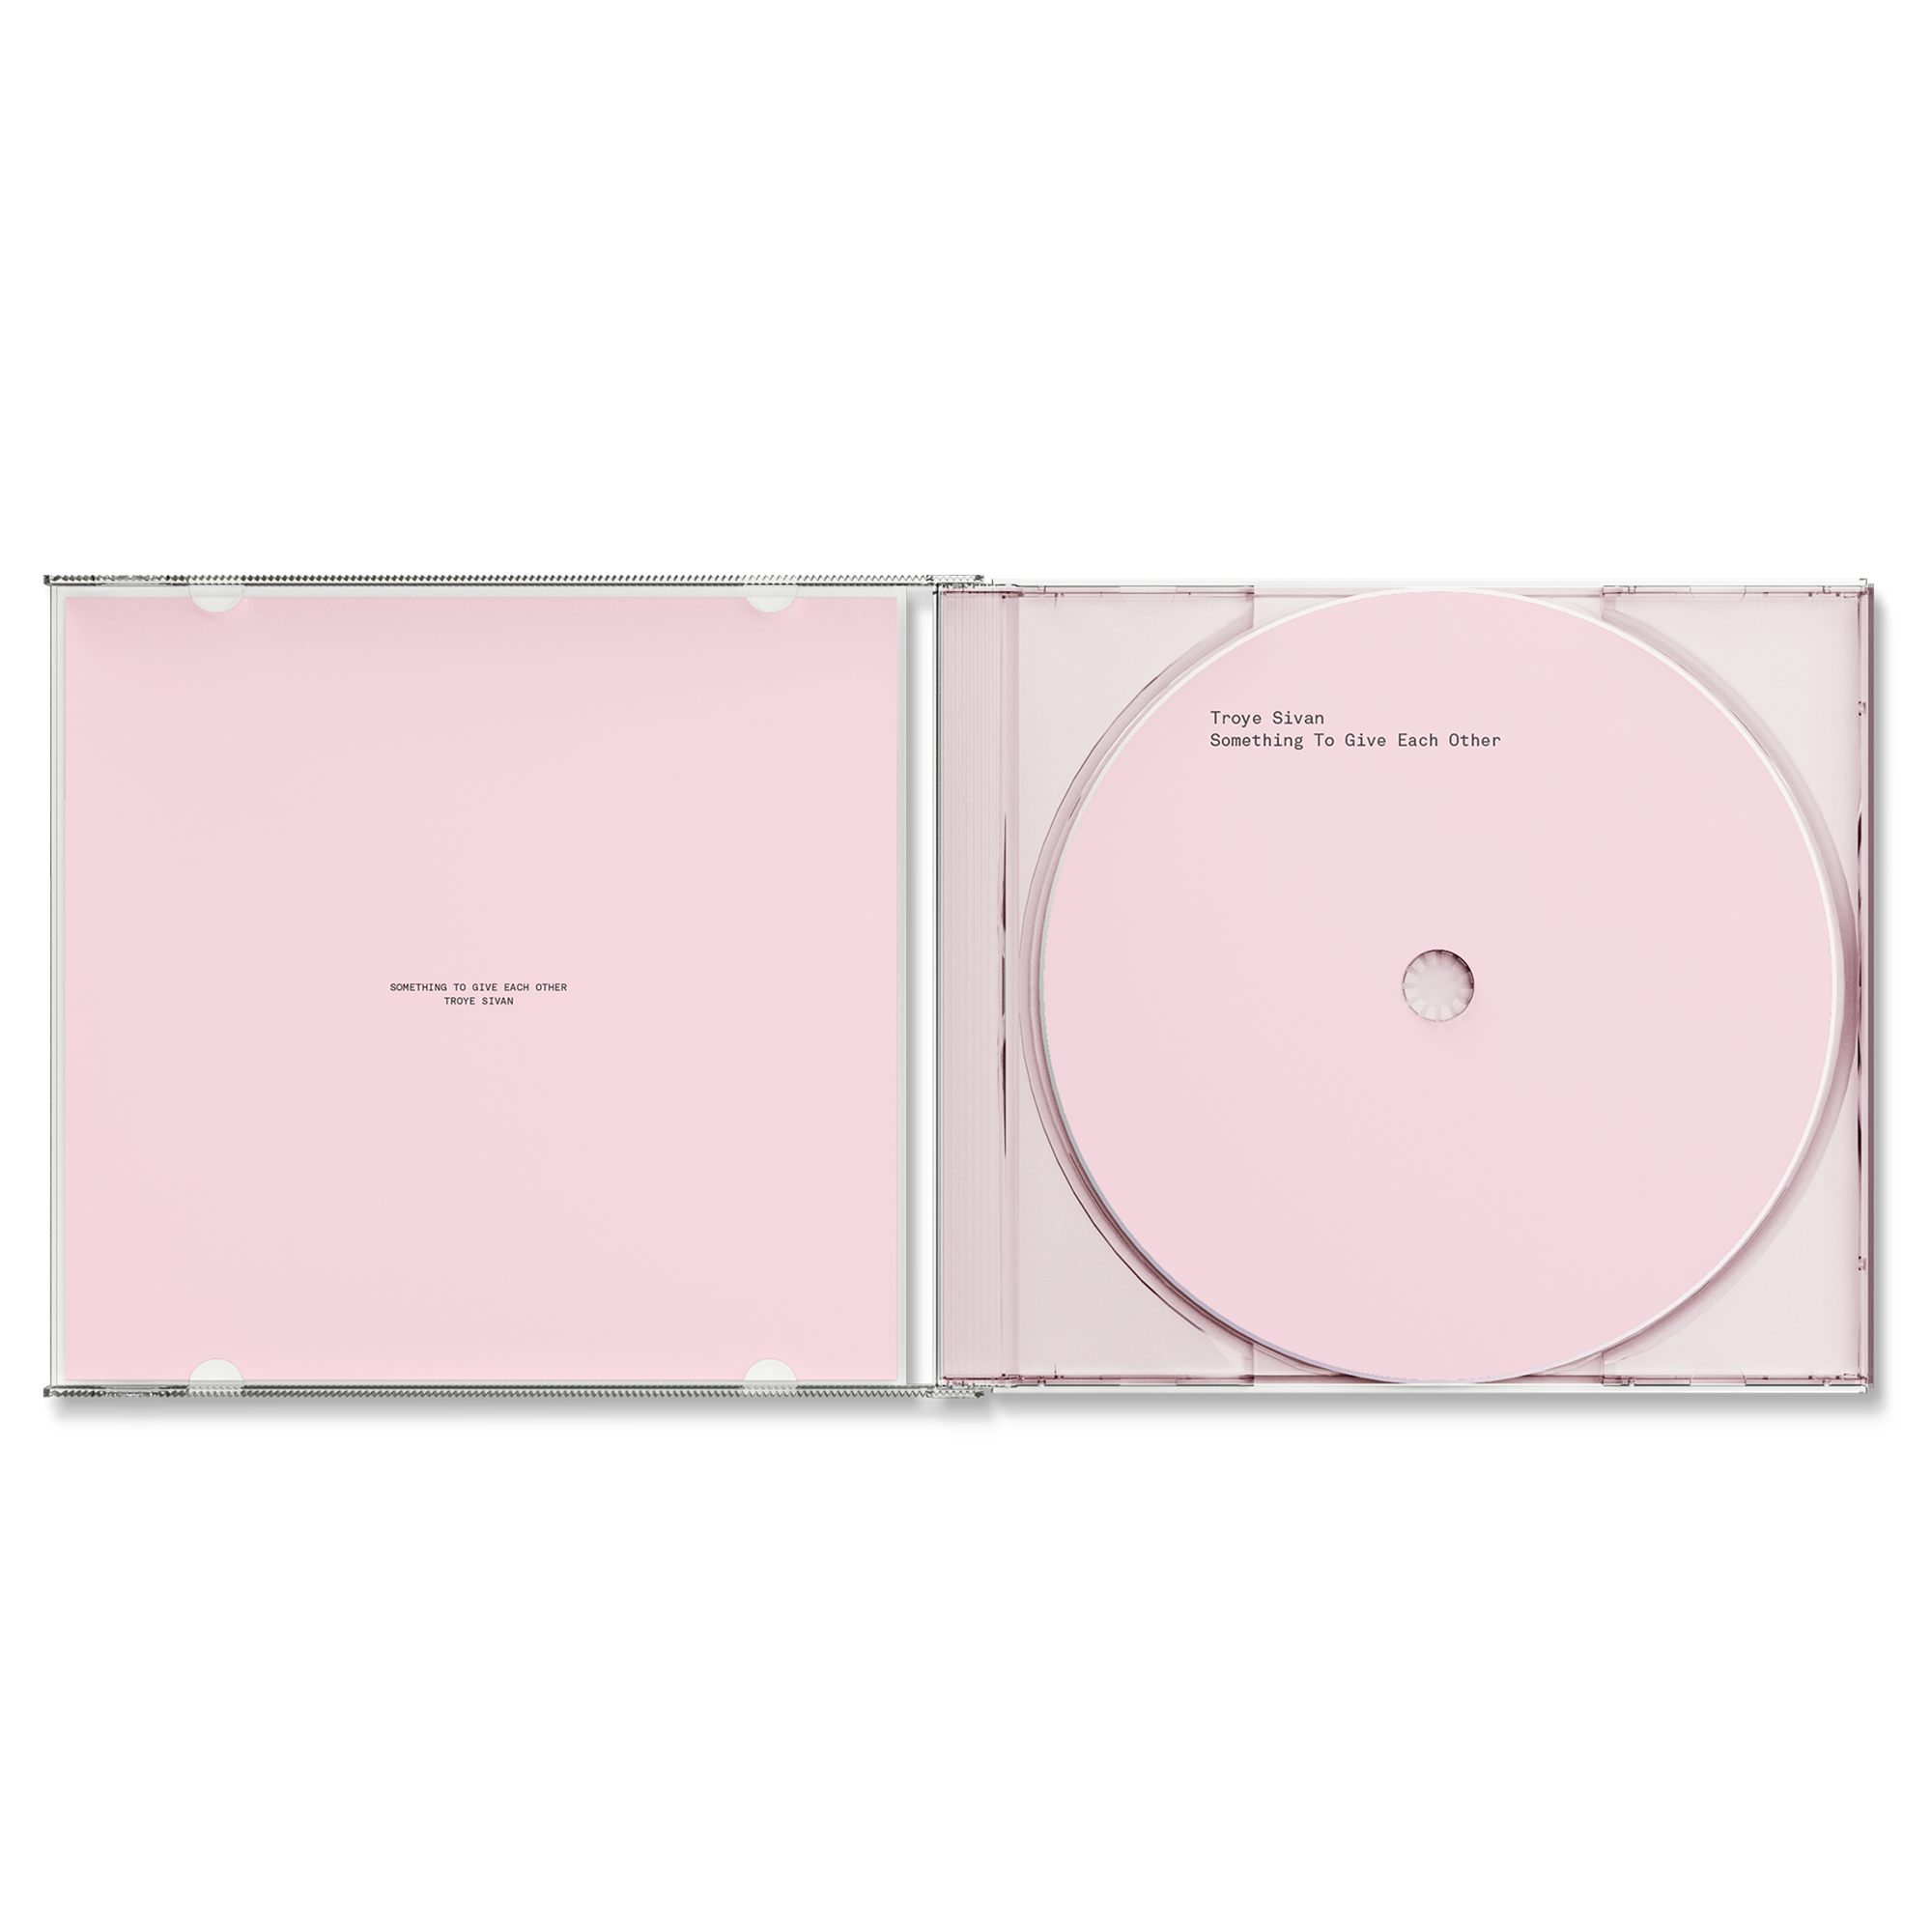 Something To Give Each Other - CD Interior